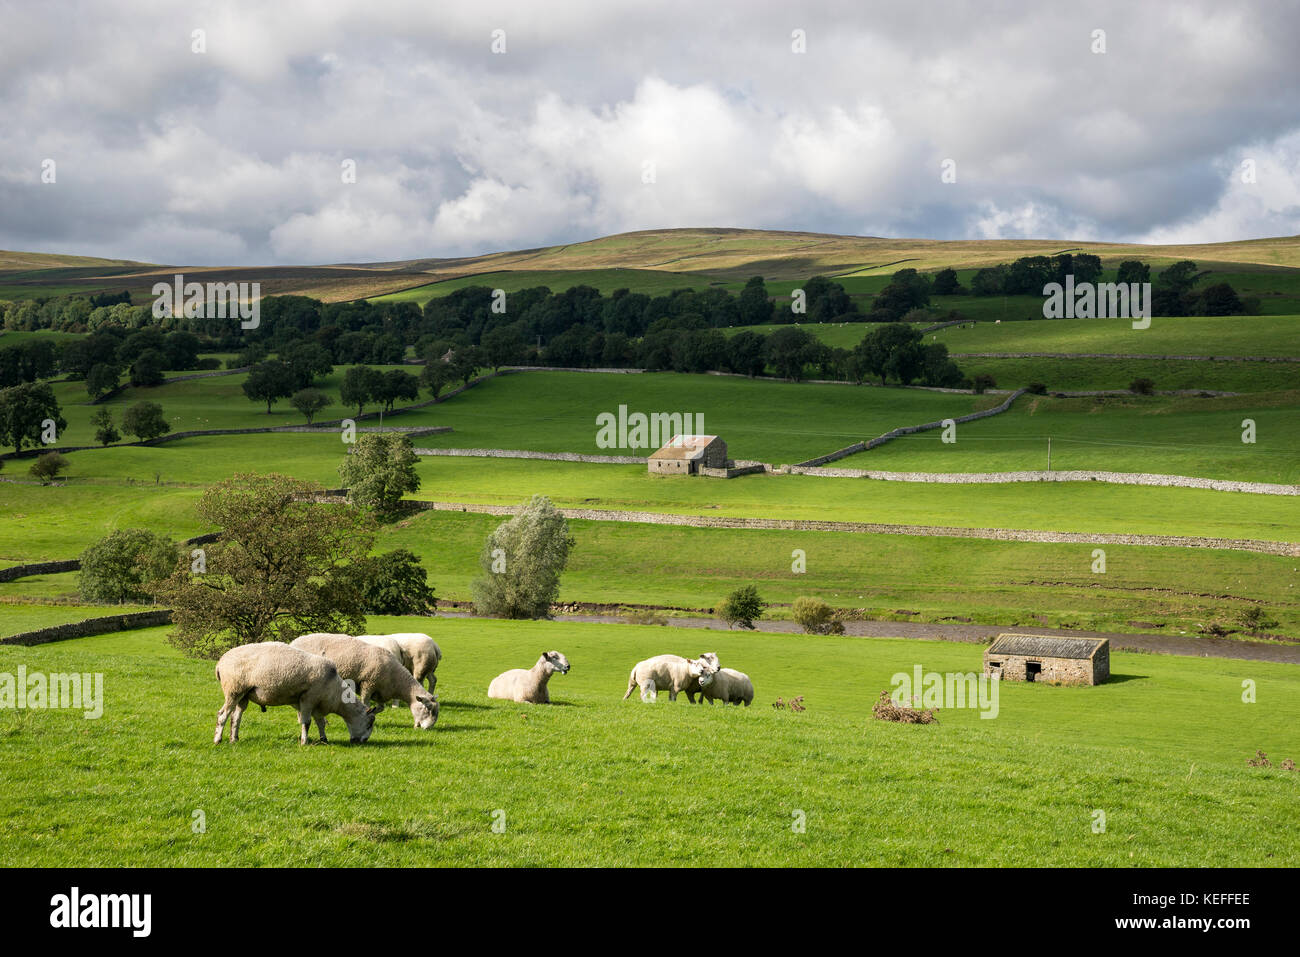 Flock of sheep near Hawes in Wensleydale, Yorkshire Dales, England. Stock Photo